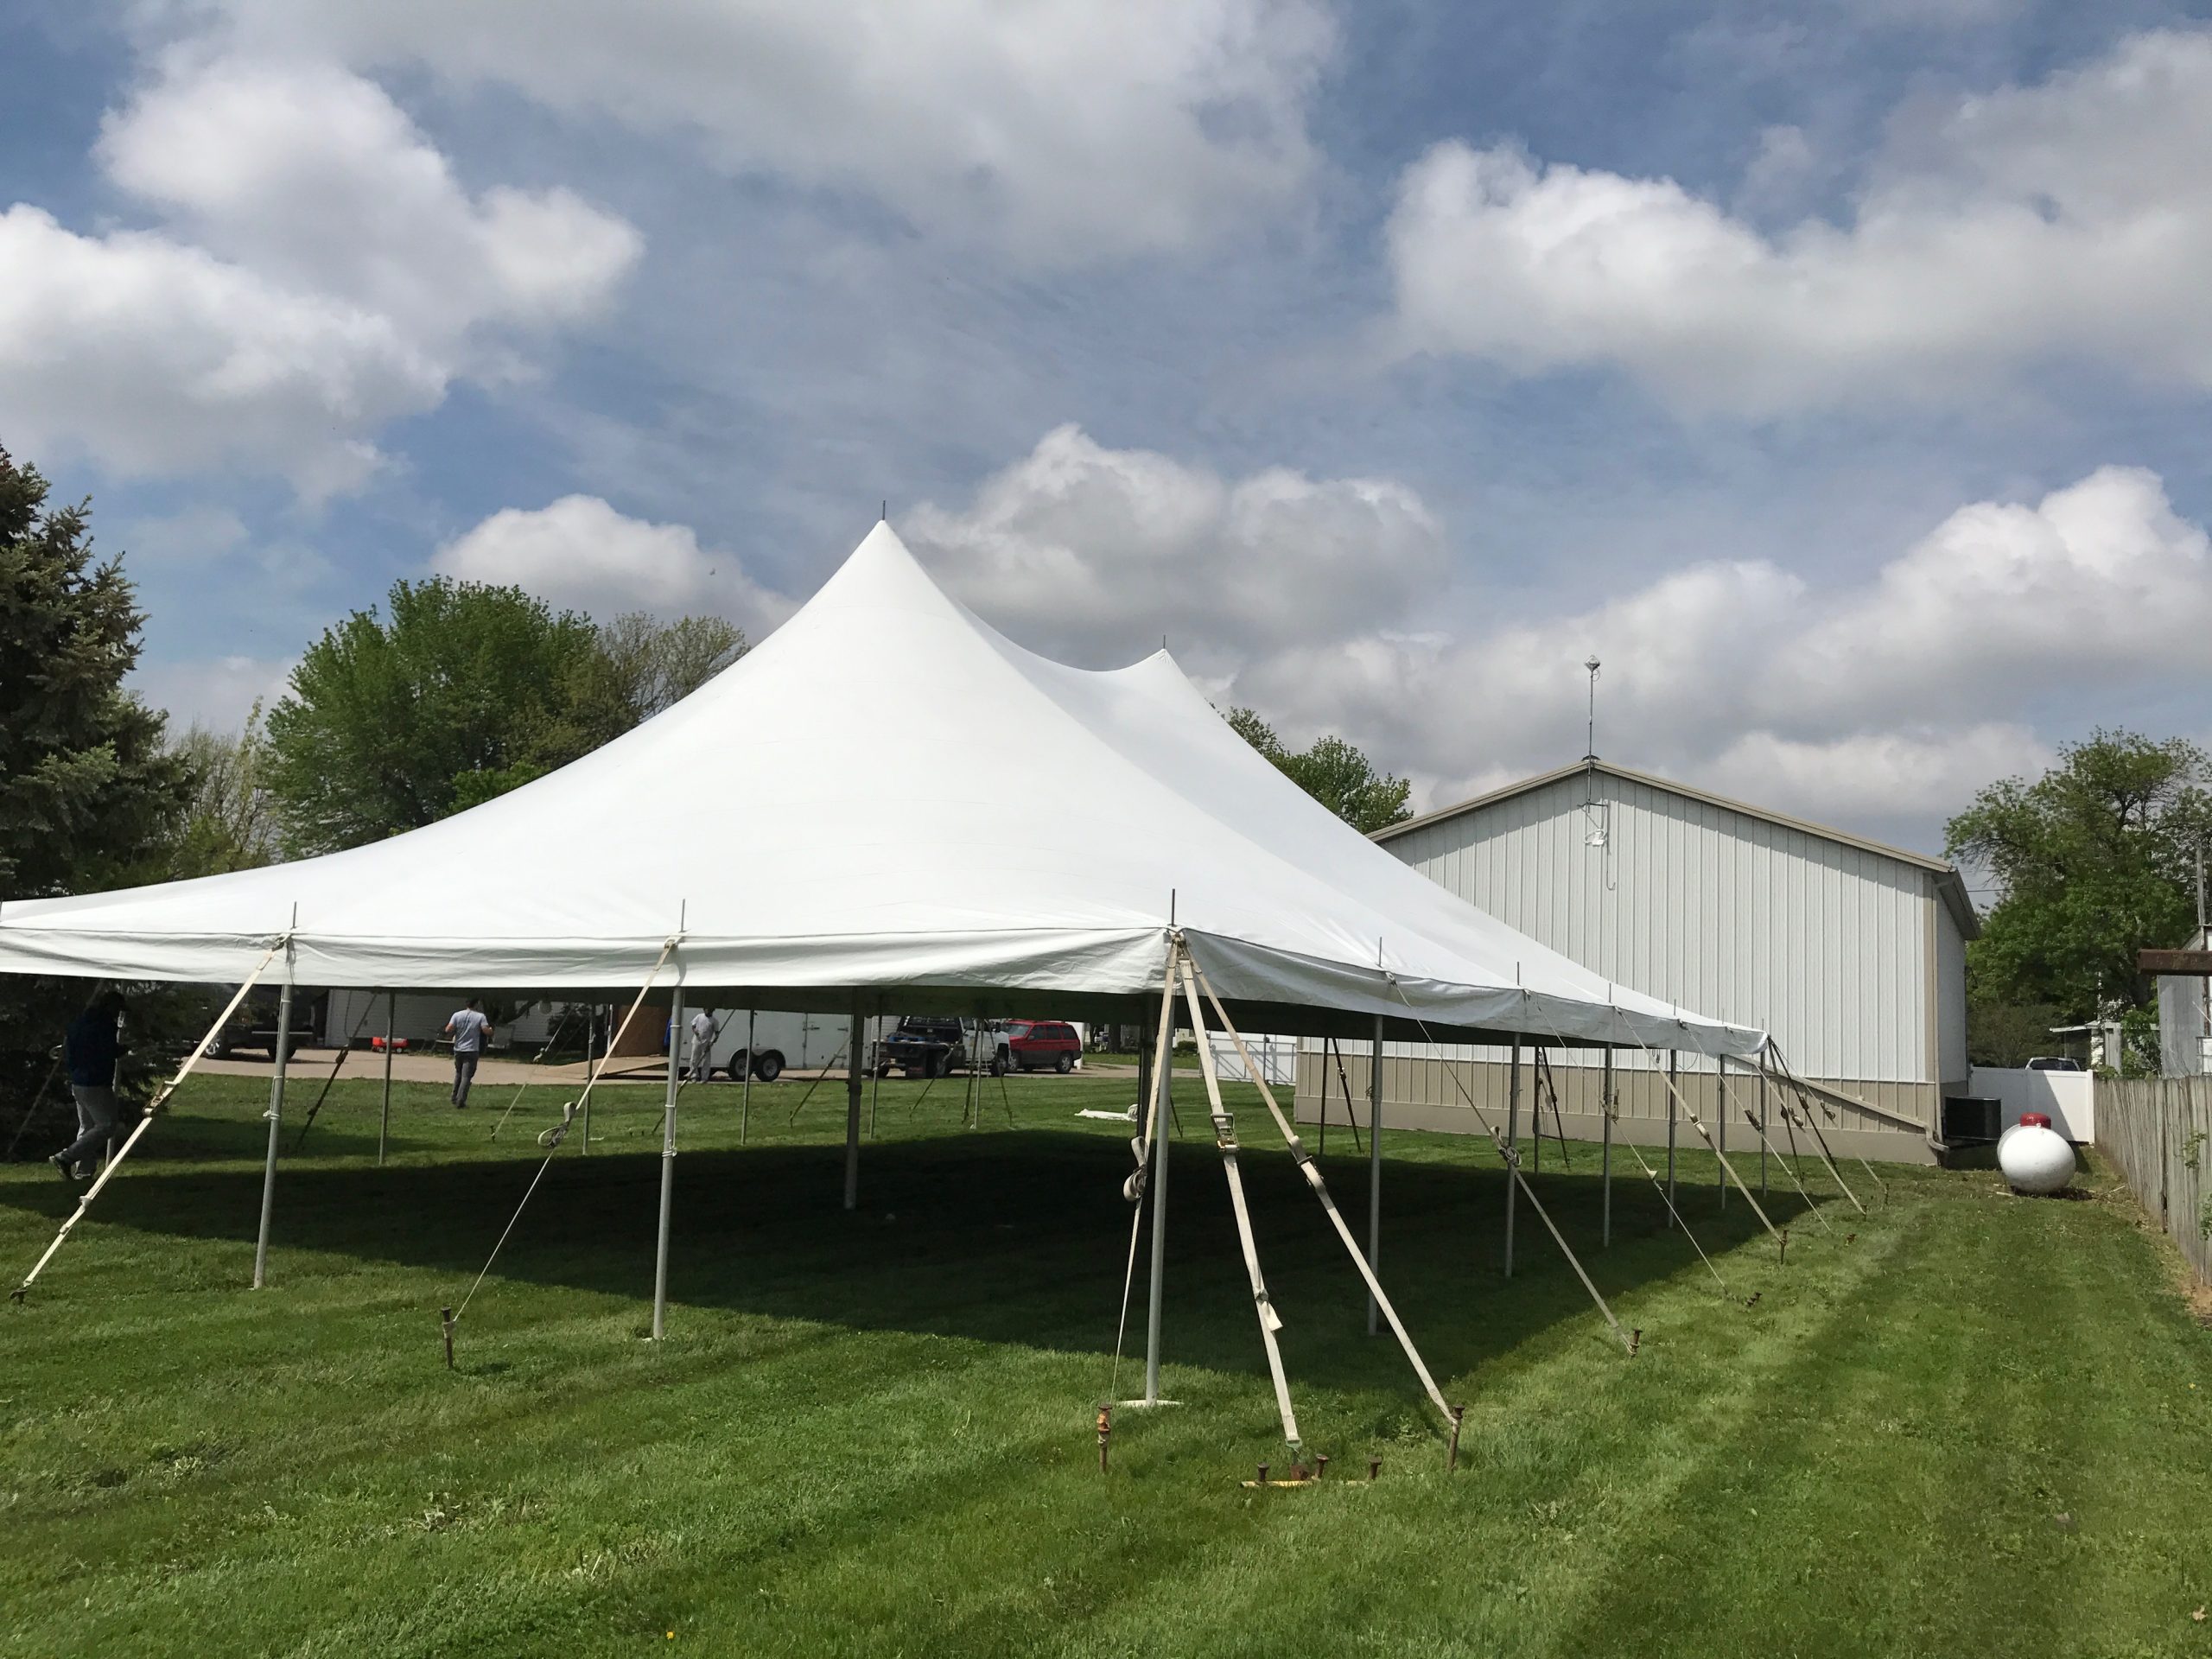 Side view of 40' x 60' rope and pole Birthday Party tent in Washington, Iowa